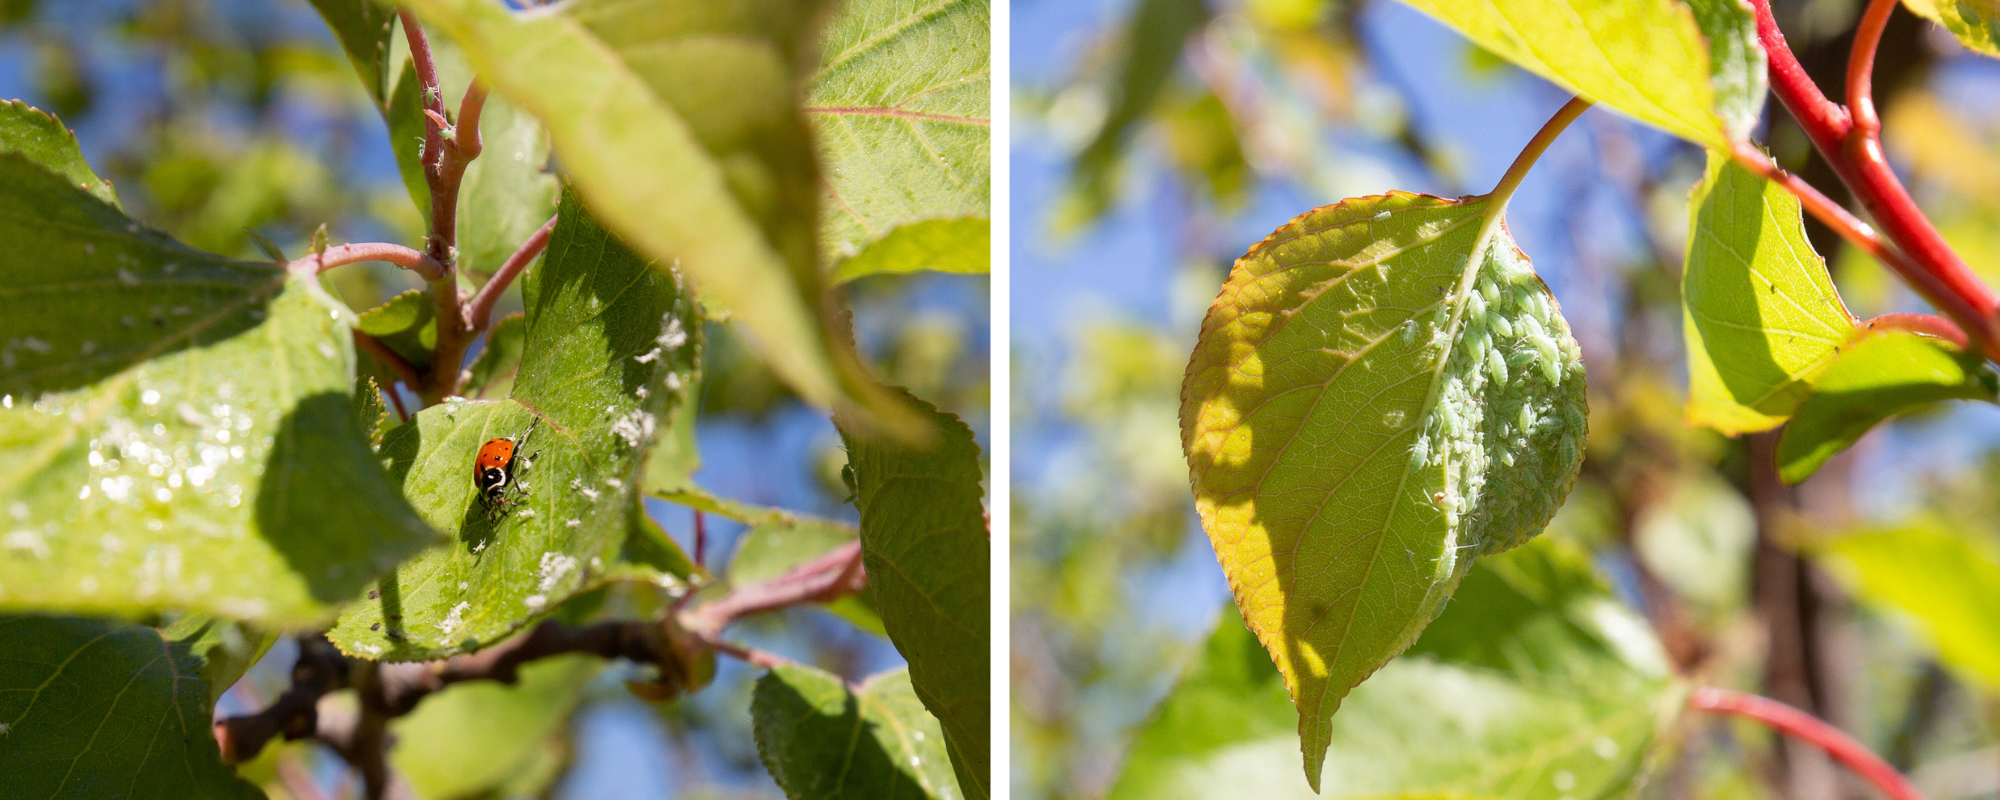 L: ﻿Ladybug and dead aphids on a leaf ; R: live aphids on apricot leaf